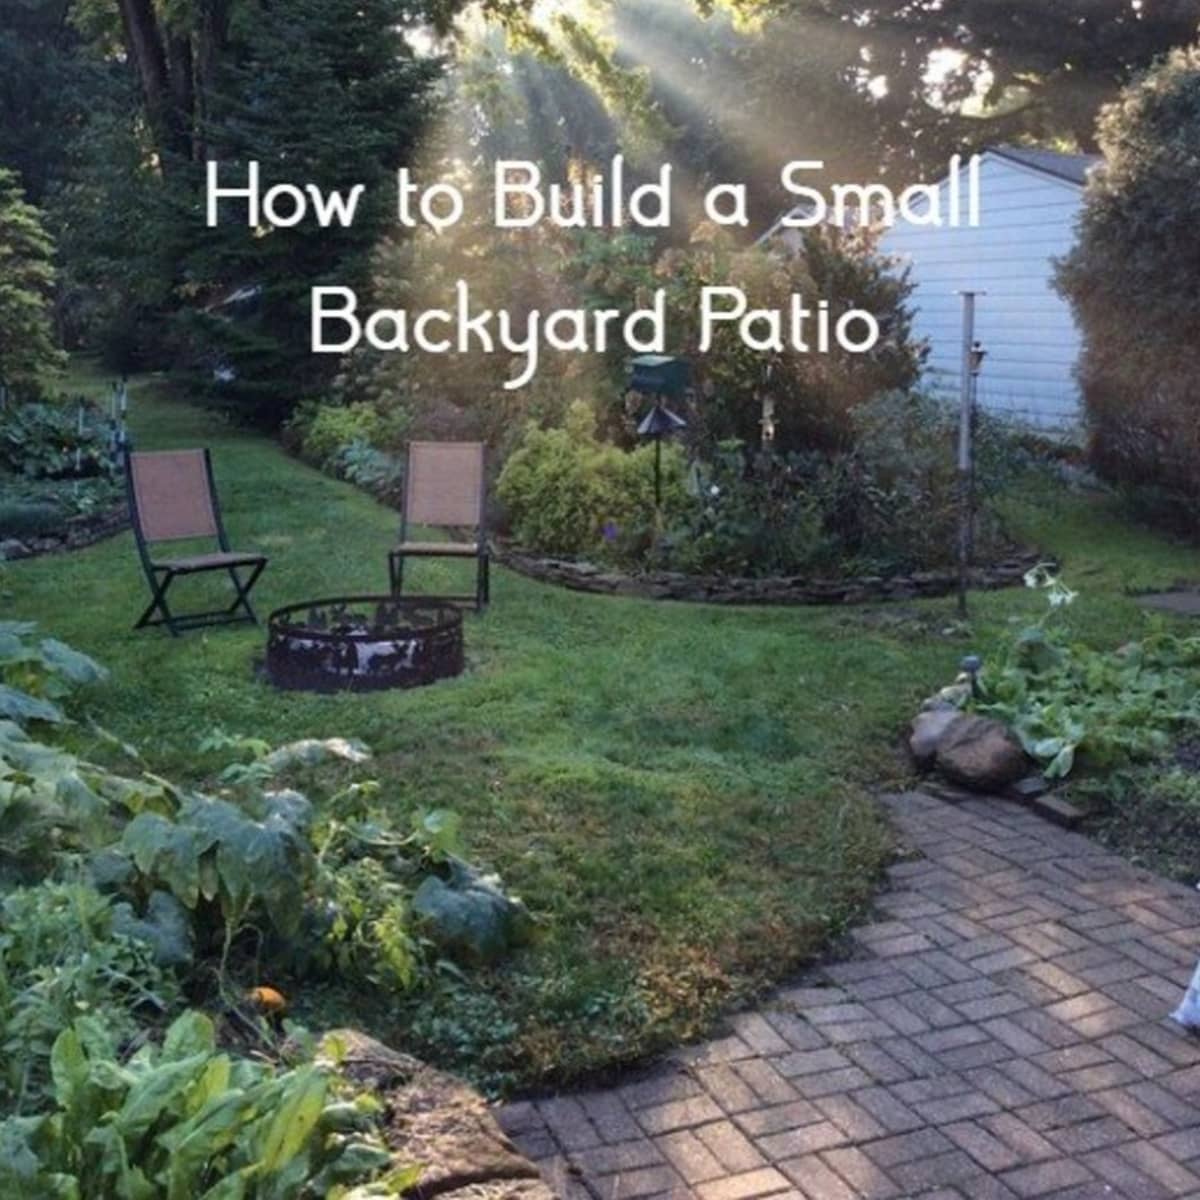 How To Build A Small Backyard Patio, Large Landscaping Stepping Stones Toronto Canada